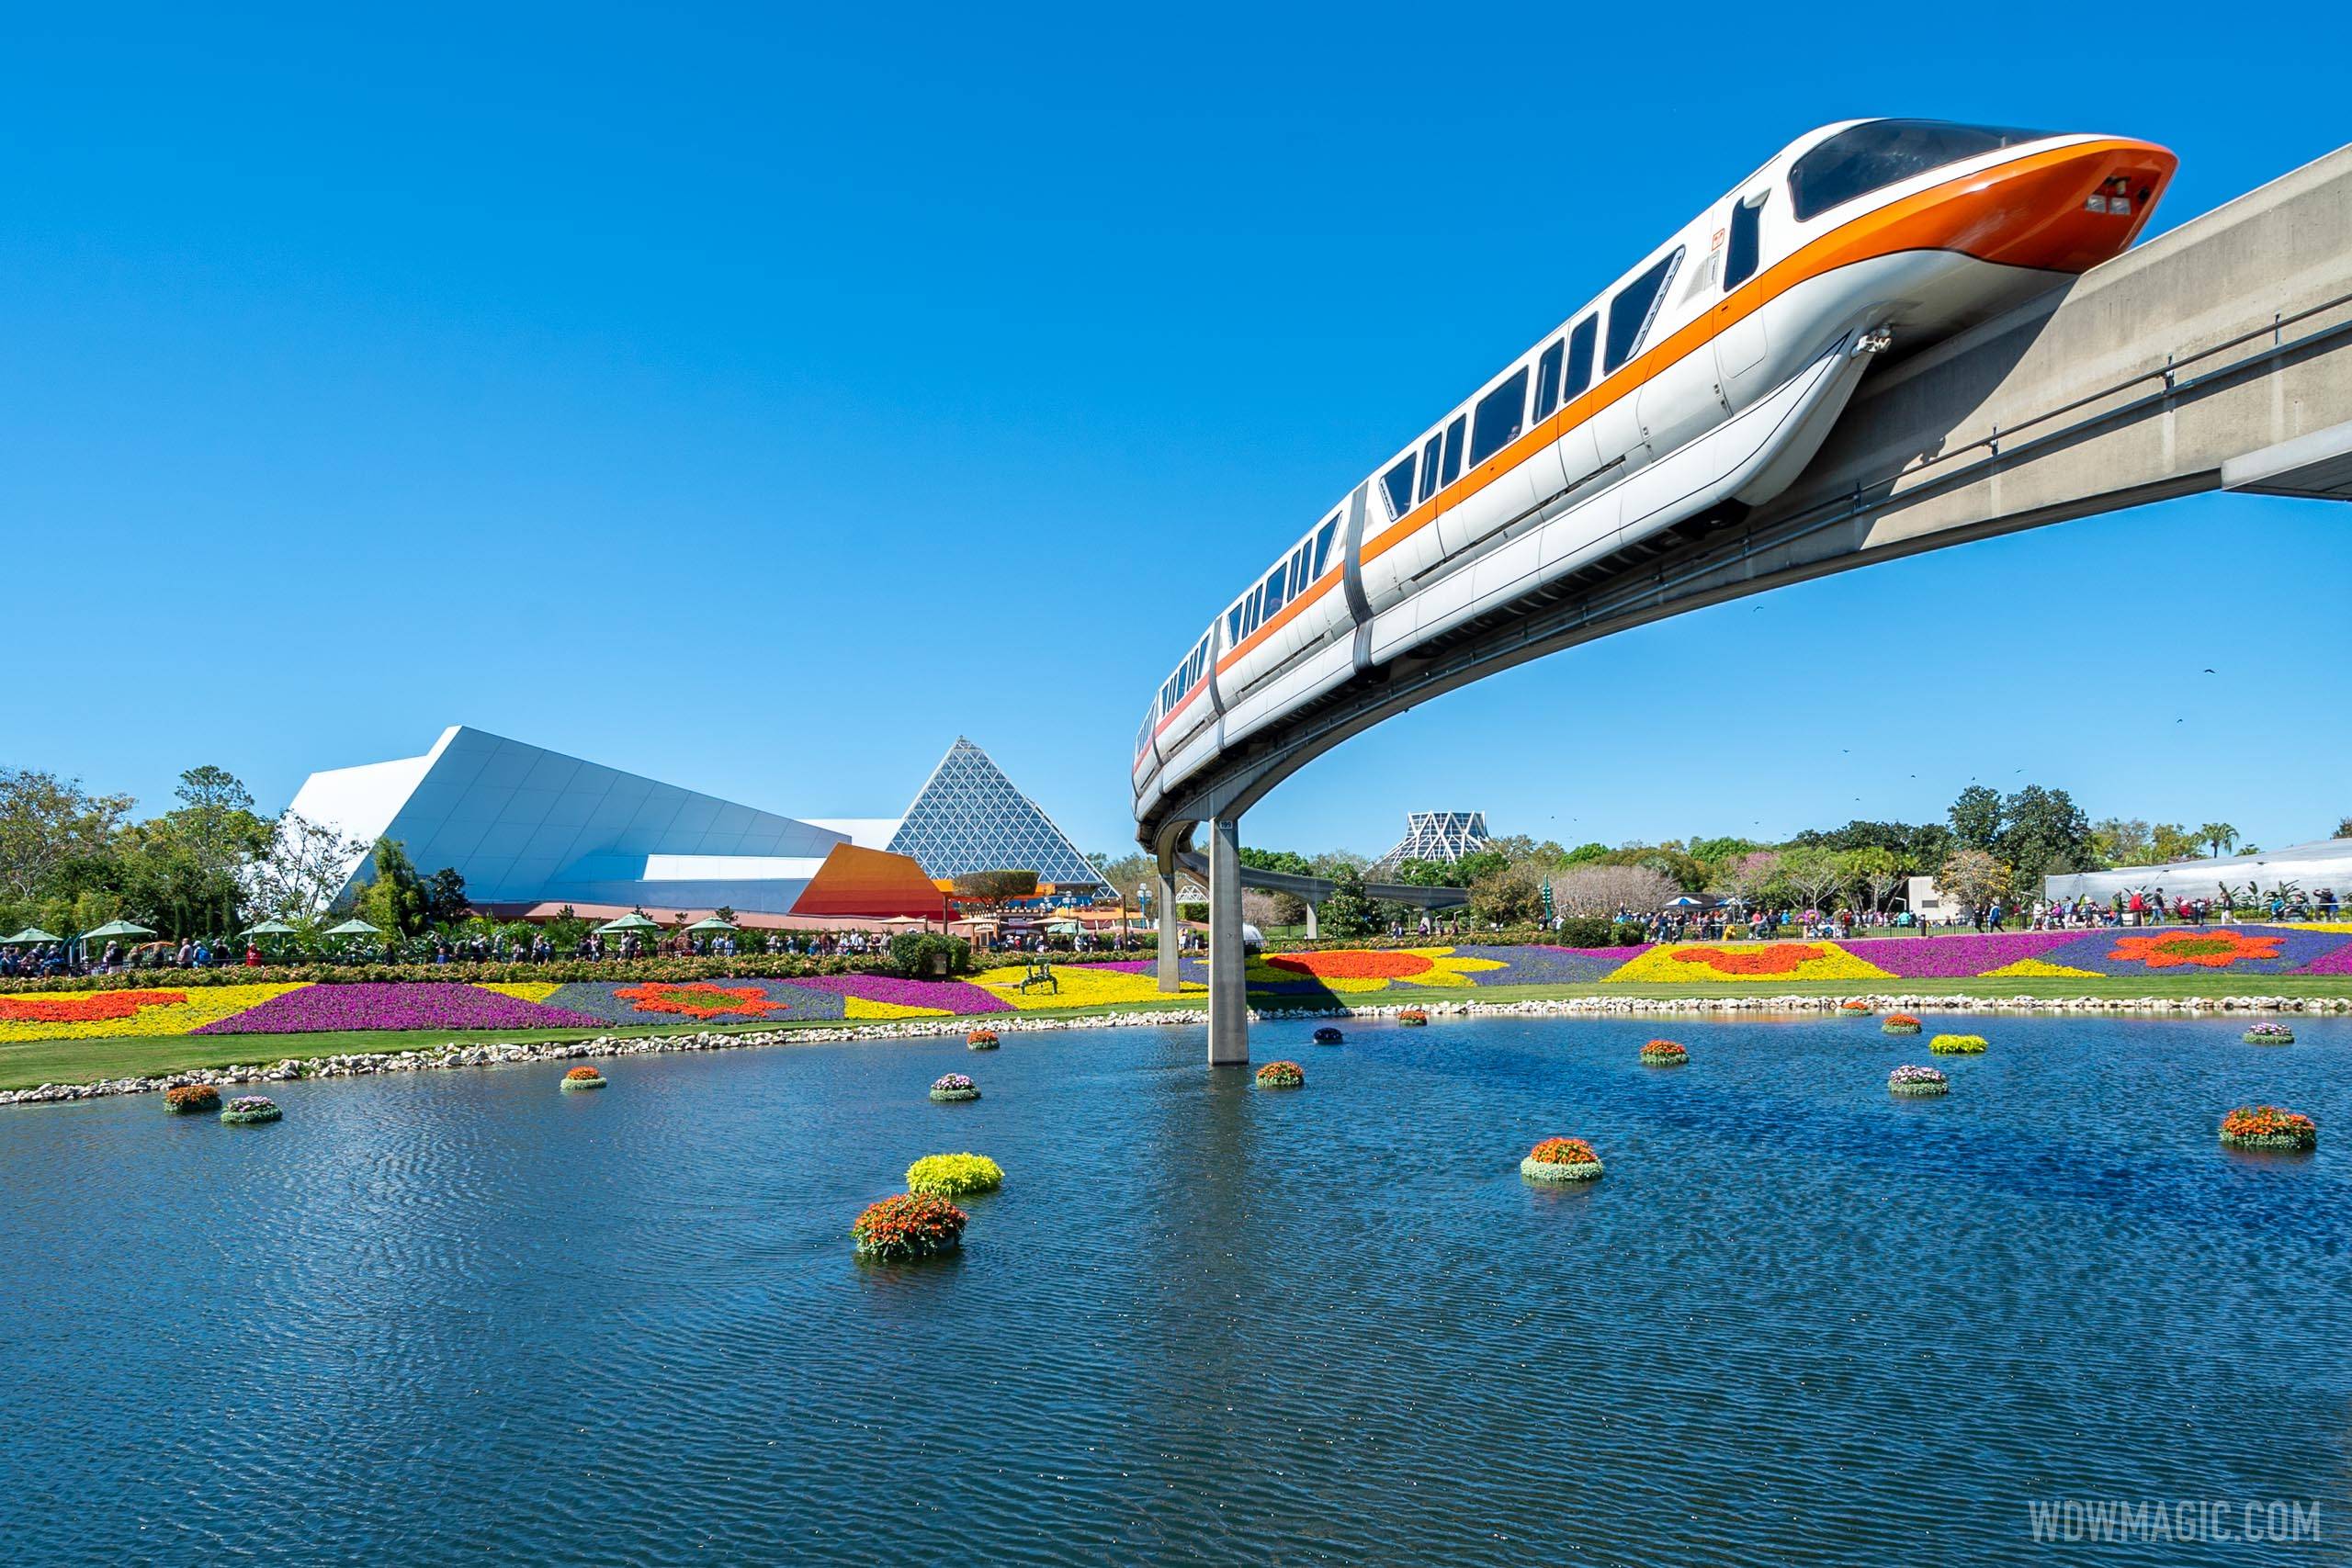 The EPCOT monorail will remain closed for the start of park hopping